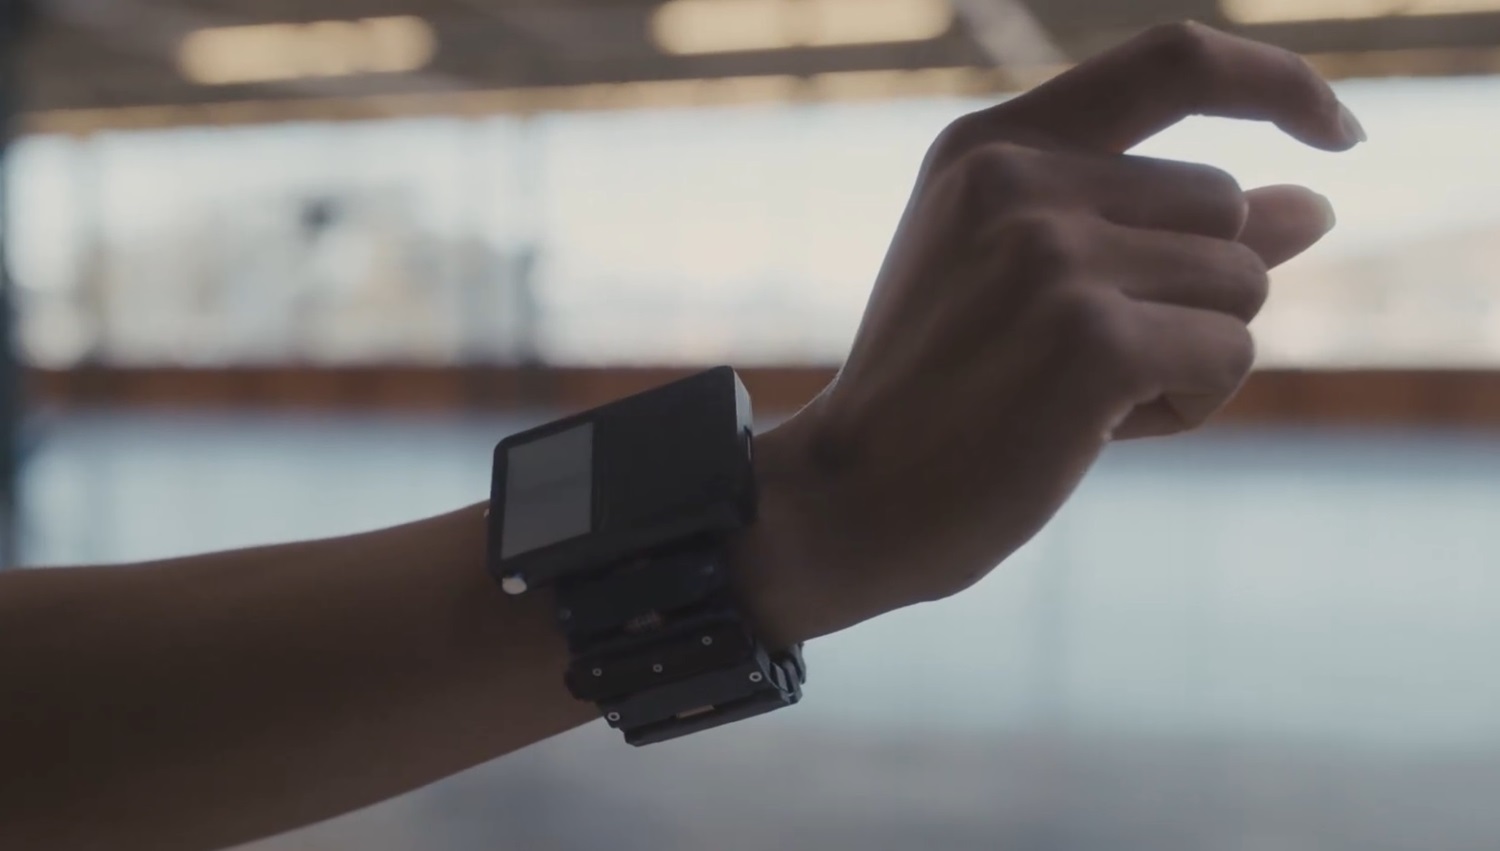 Meta's AR Wristband Lets You Control Devices with Your Mind